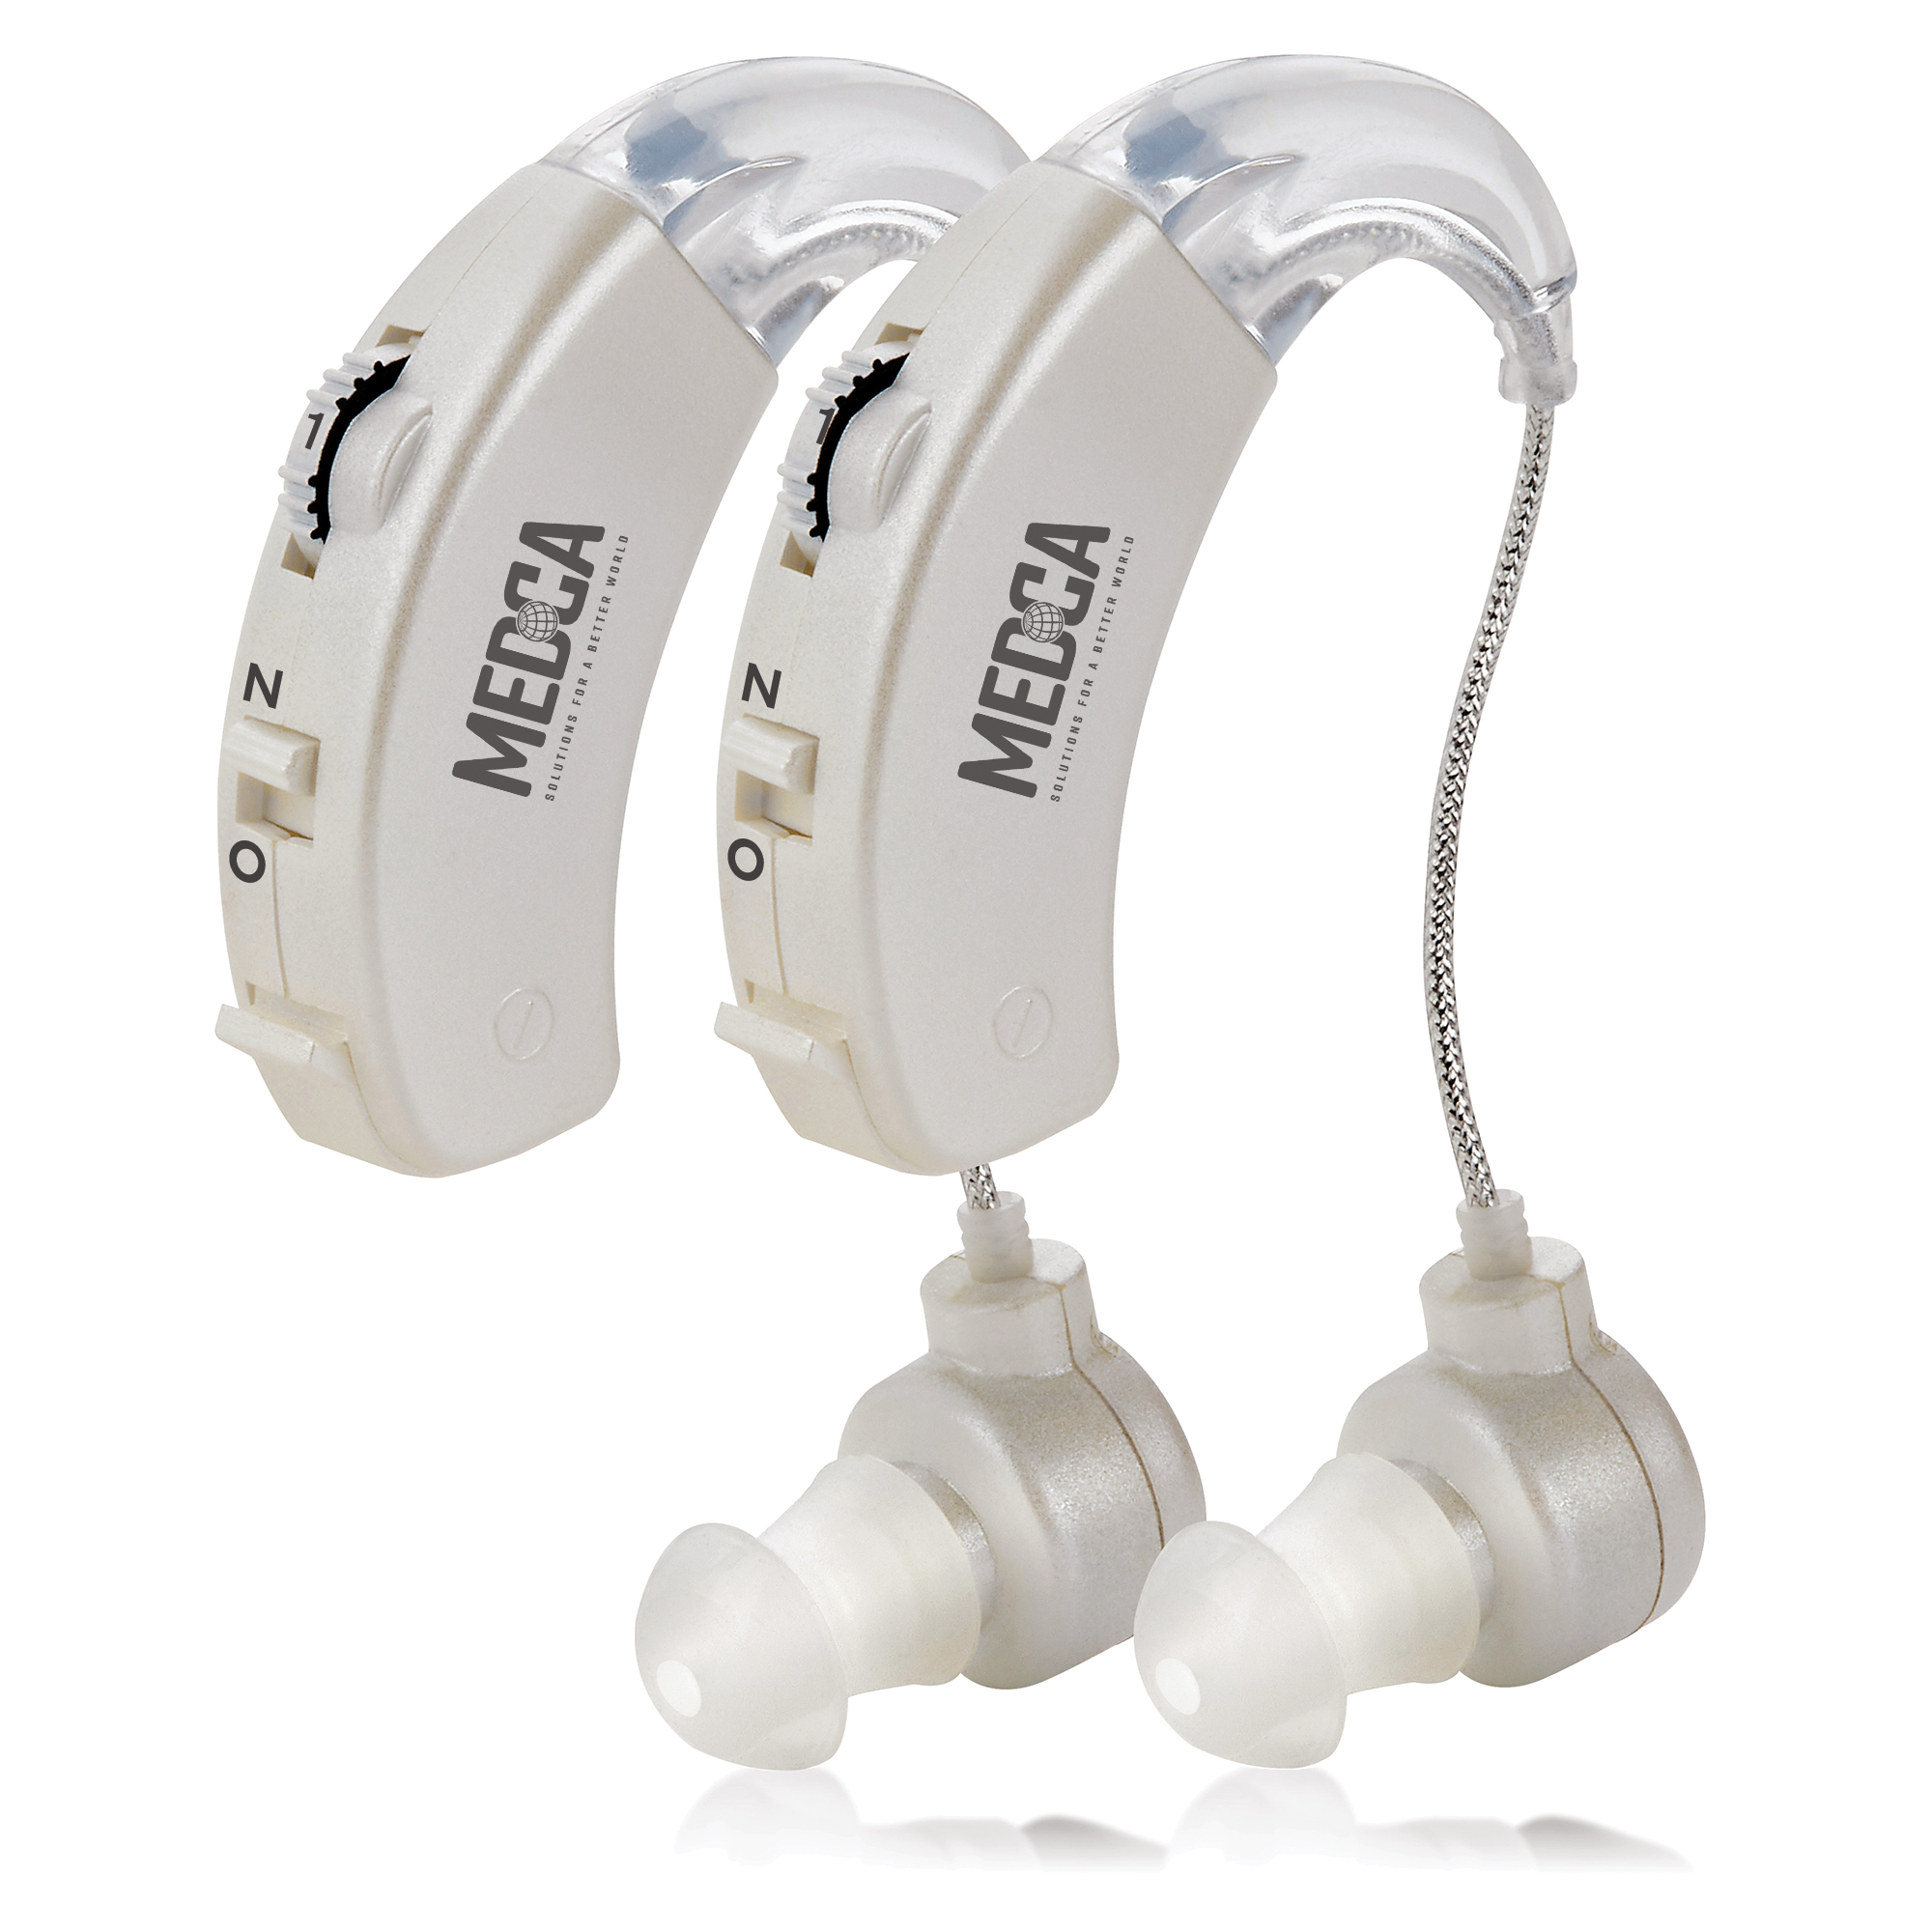 Behind the Ear Sound Amplifier - BTE Hearing Ear Amplification Device and  Digital Sound Enhancer PSAD for the Hard of Hearing, Noise Reducing  Feature,